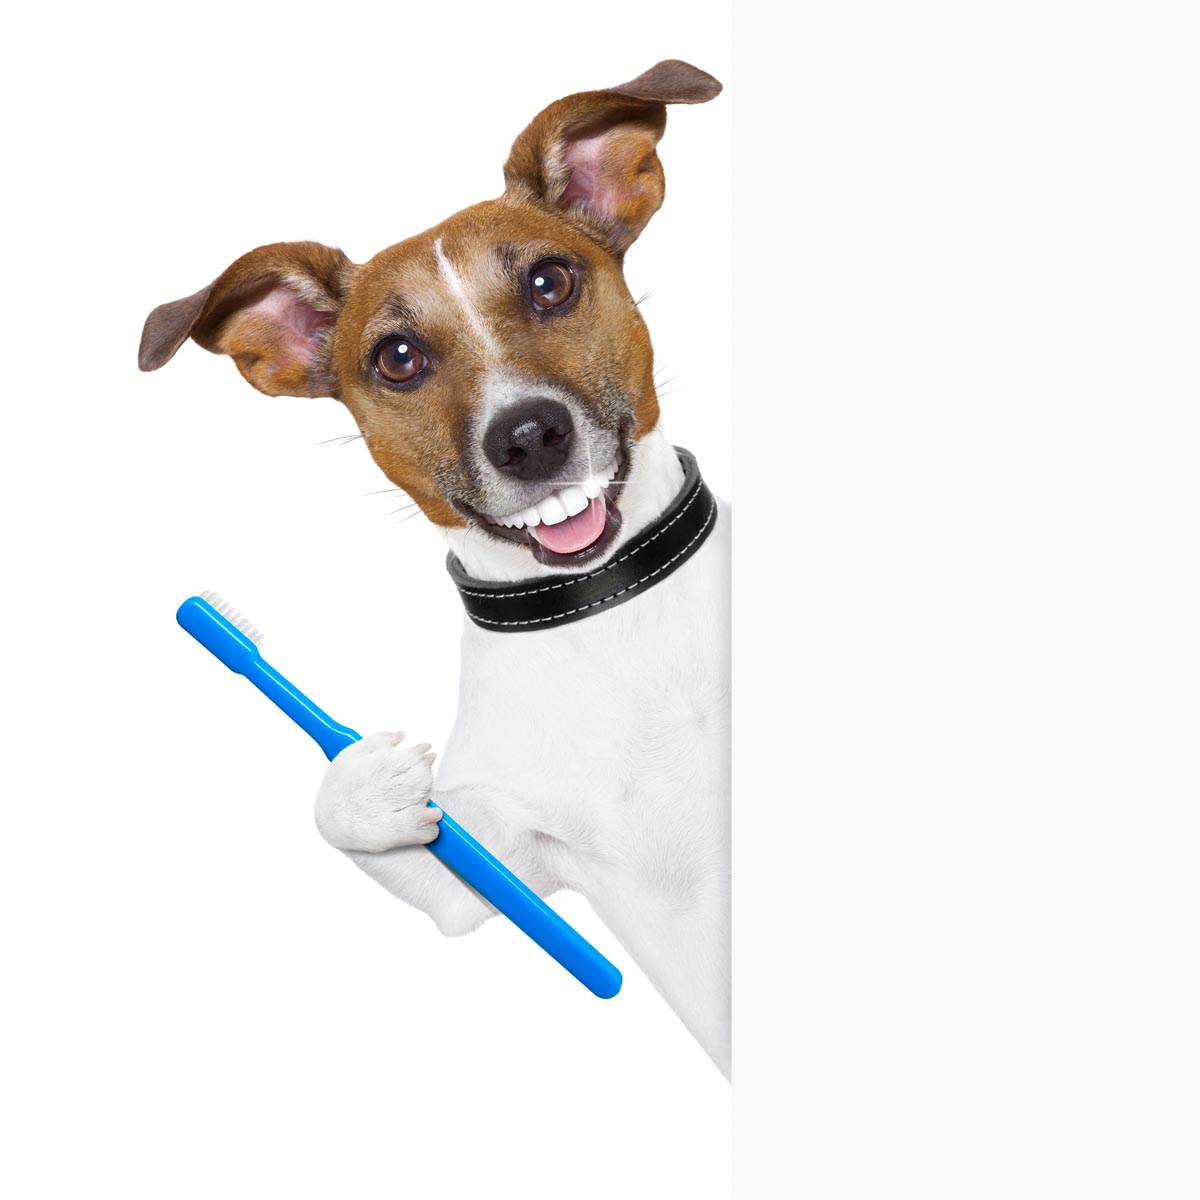 Dog With Toothbrush Dog With Toothbrush